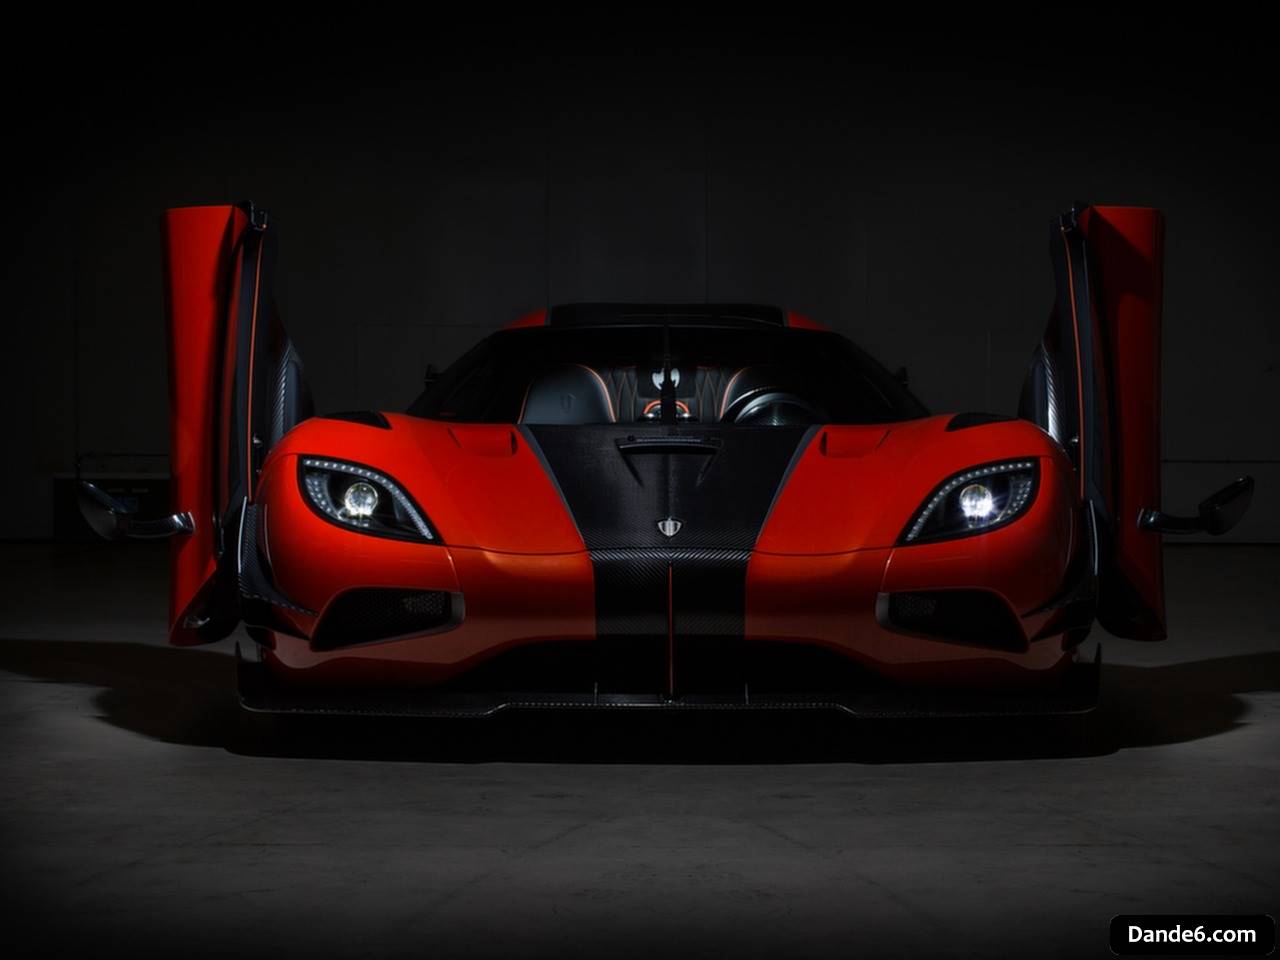 2017 Koenigsegg Agera RS Final - One of 1